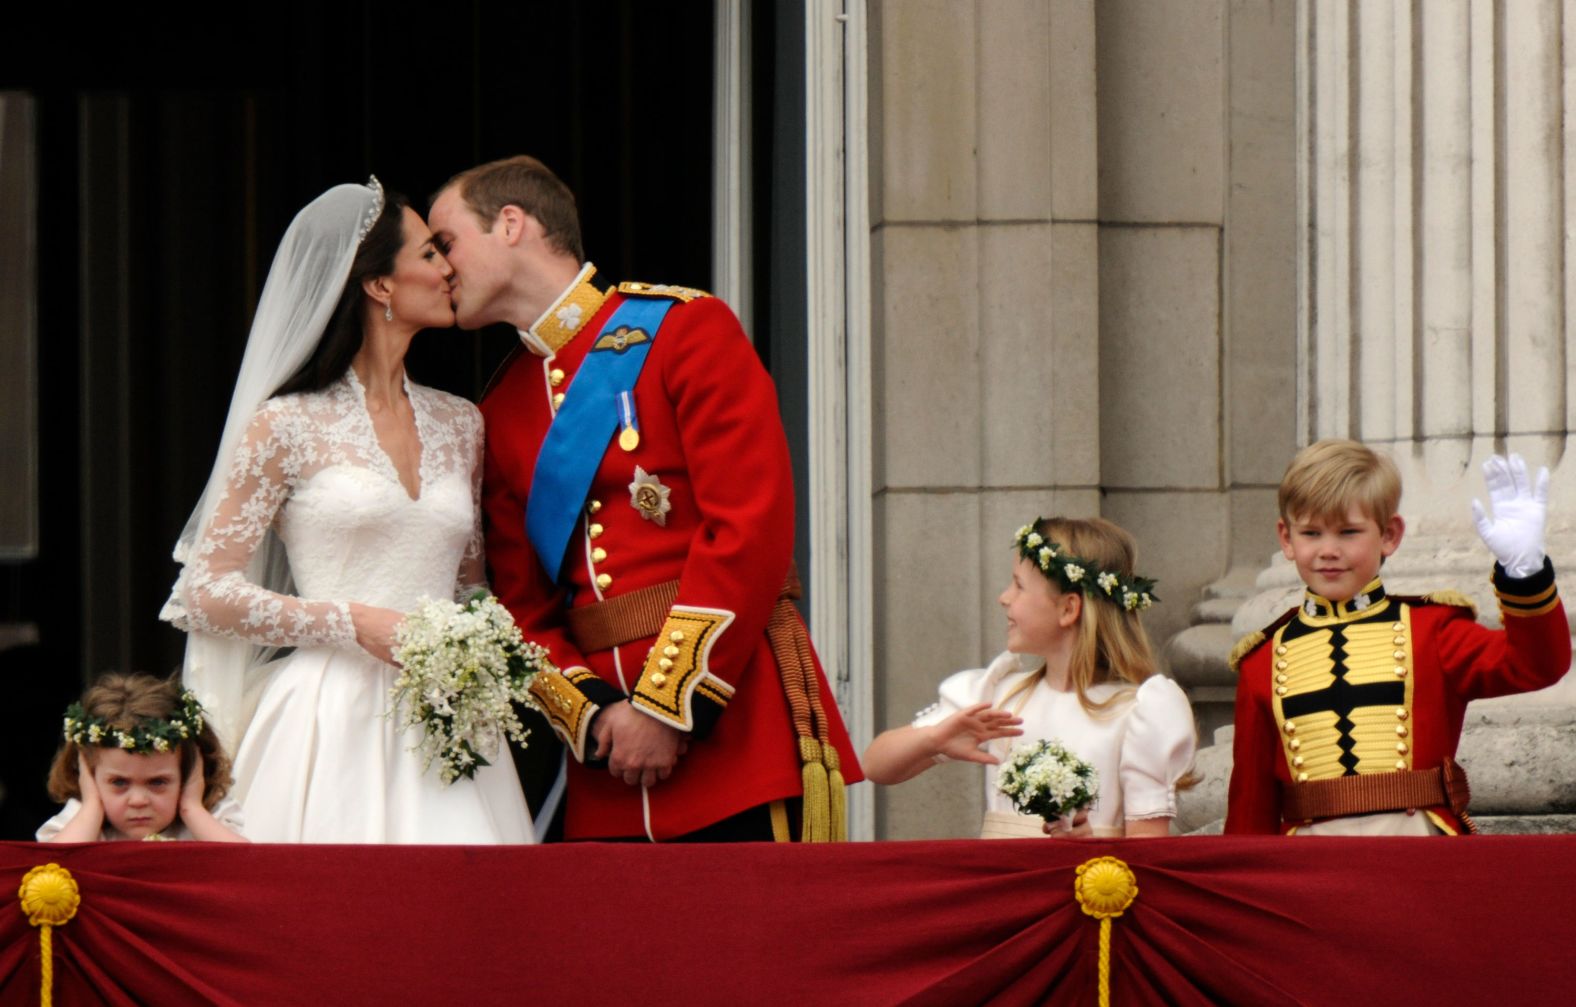 Britain's Prince William kisses his new wife, Catherine, on the balcony of Buckingham Palace in April 2011. The wedding was watched by millions around the world.